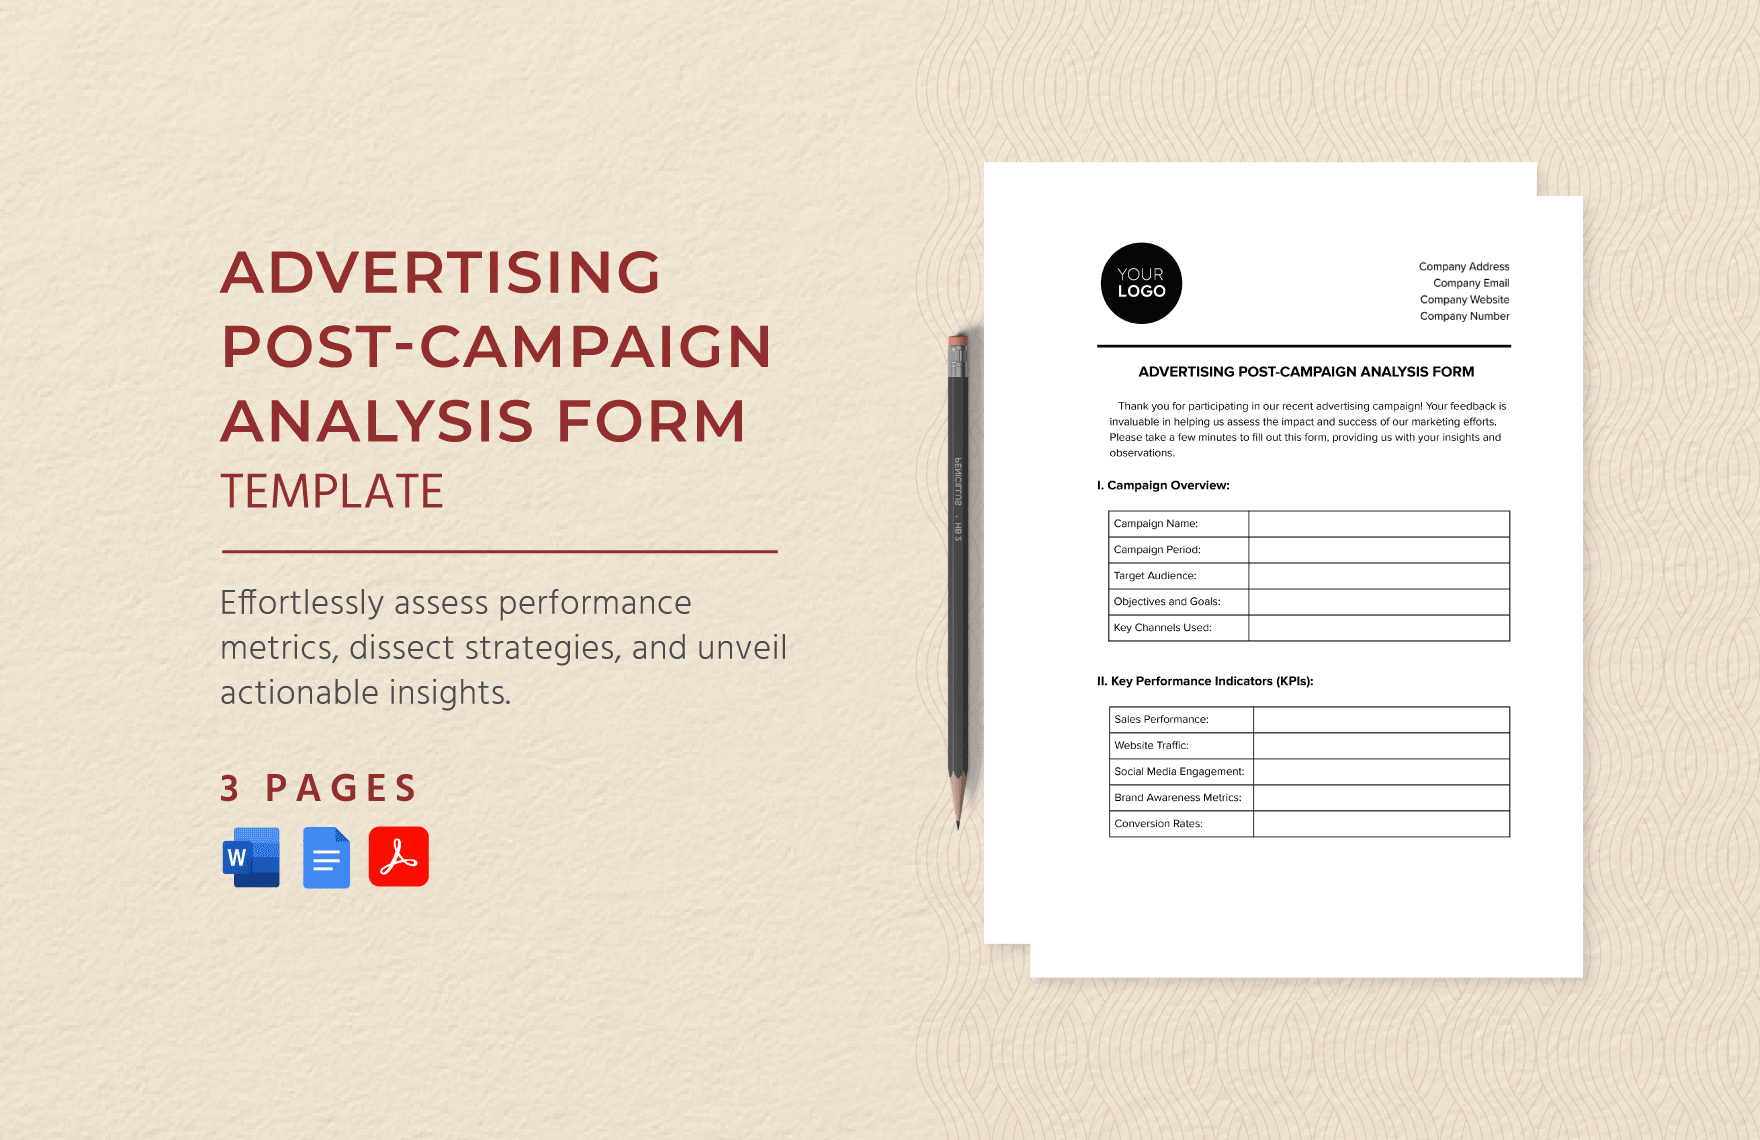 Advertising Post-Campaign Analysis Form Template